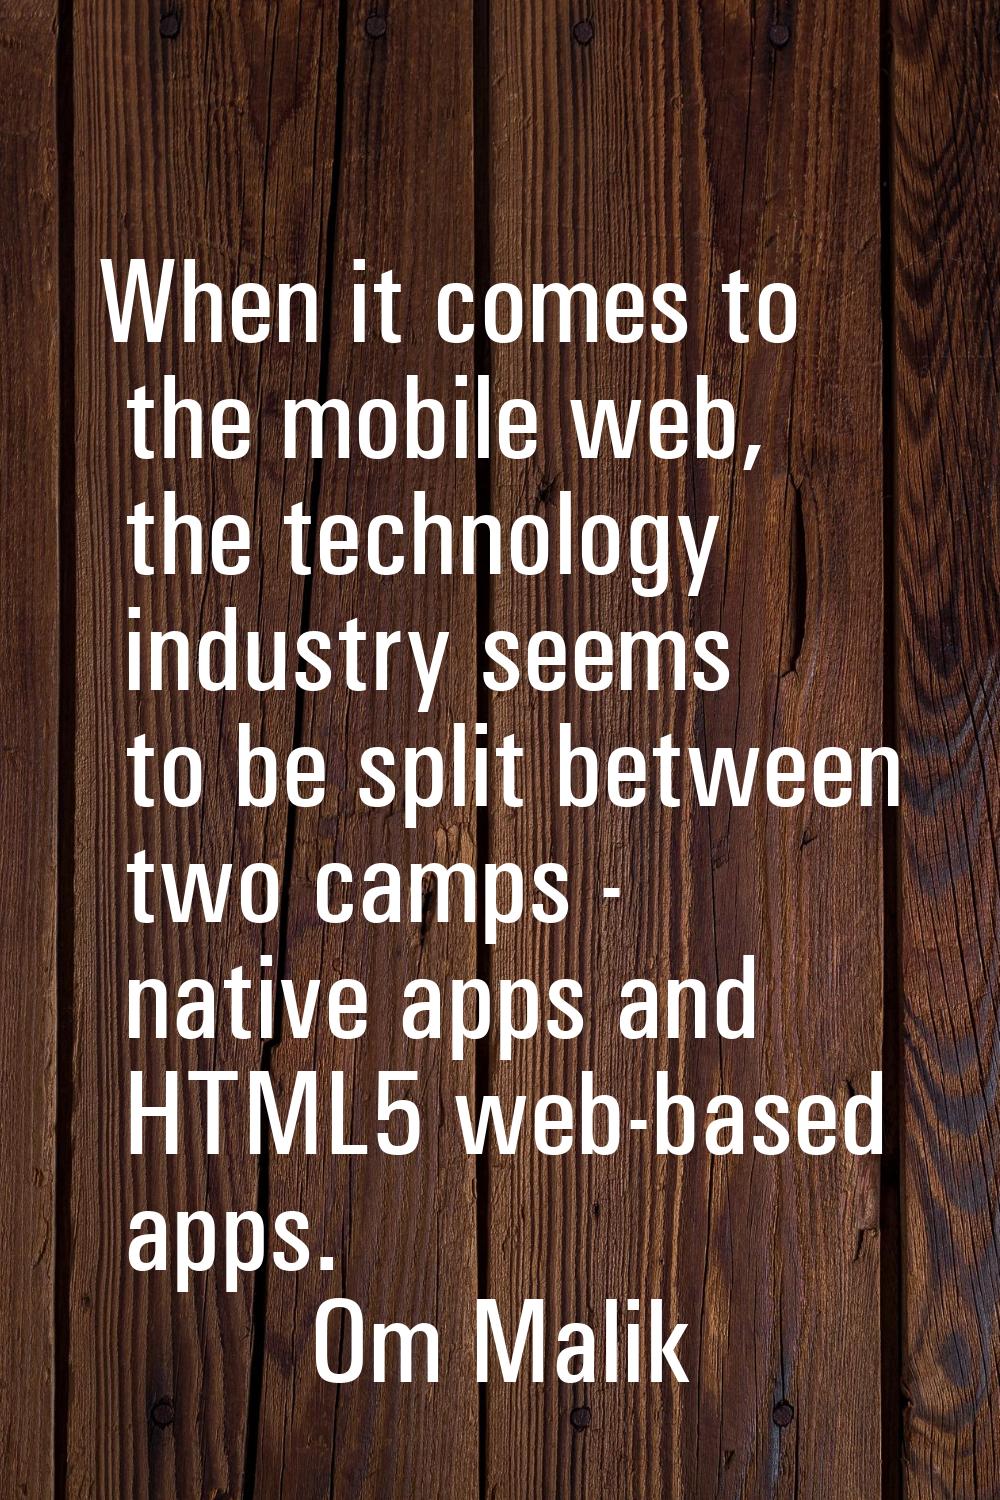 When it comes to the mobile web, the technology industry seems to be split between two camps - nati